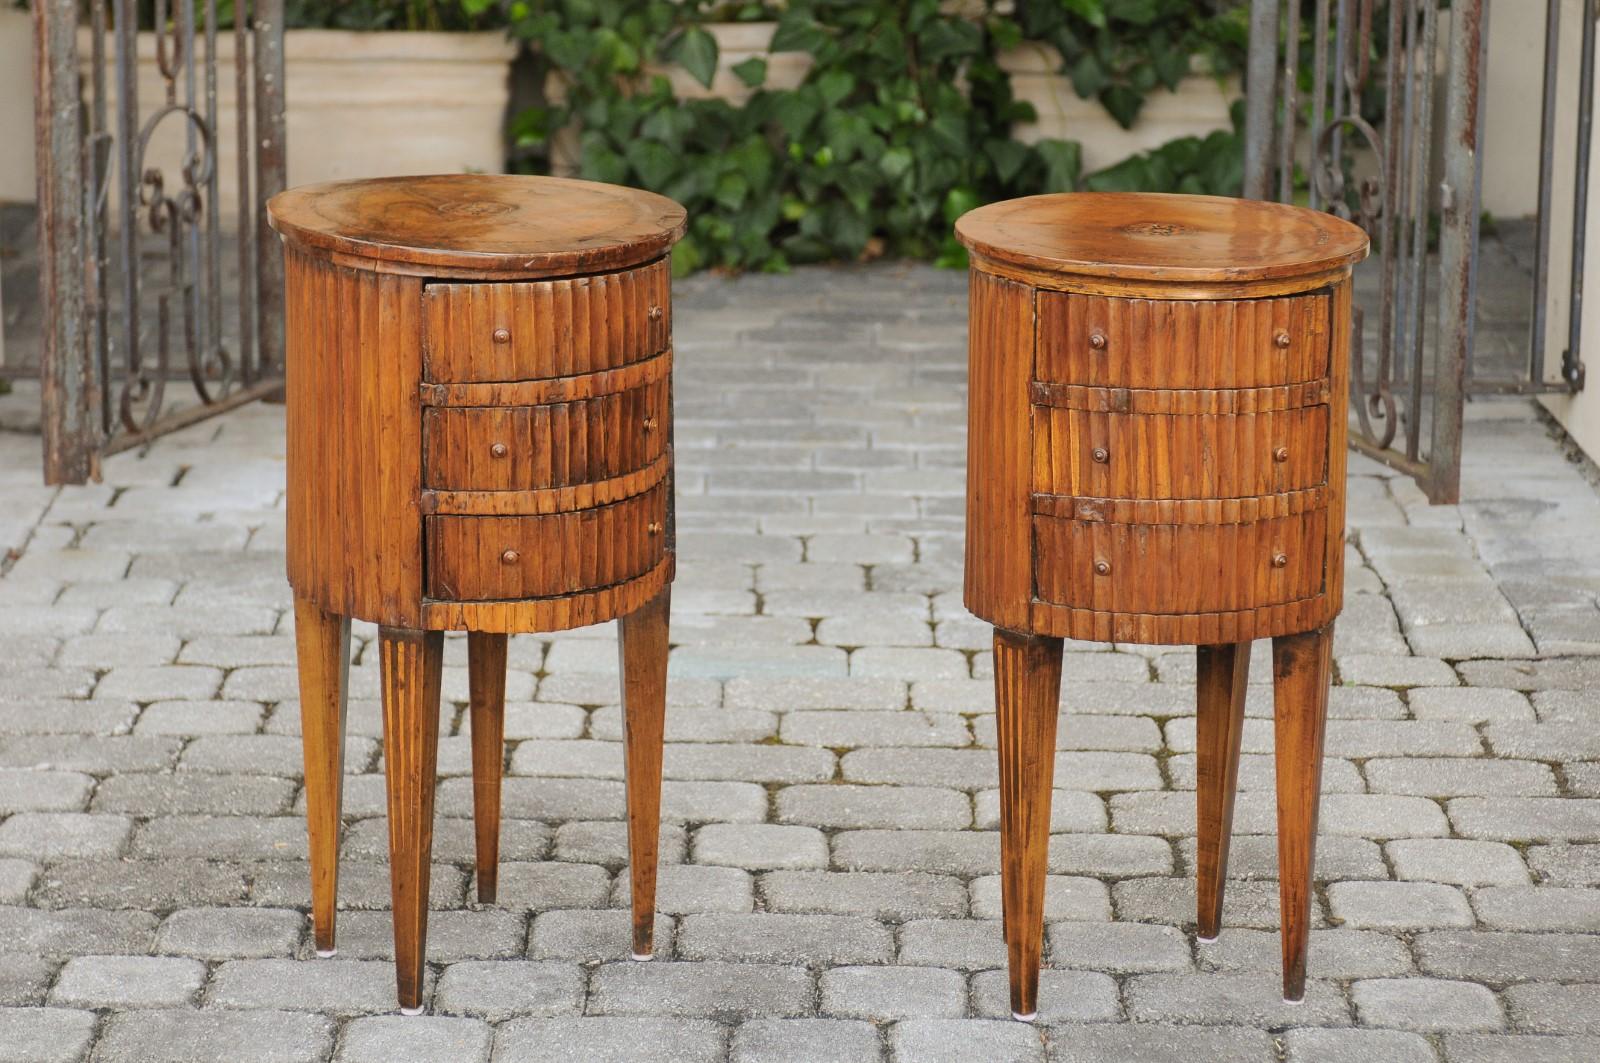 A pair of Italian neoclassical end tables from the early 19th century, with marquetry decor, three drawers, fluted accents and tapered legs. Born in Italy during the early years of the 19th century, each of this pair of exquisite end tables features